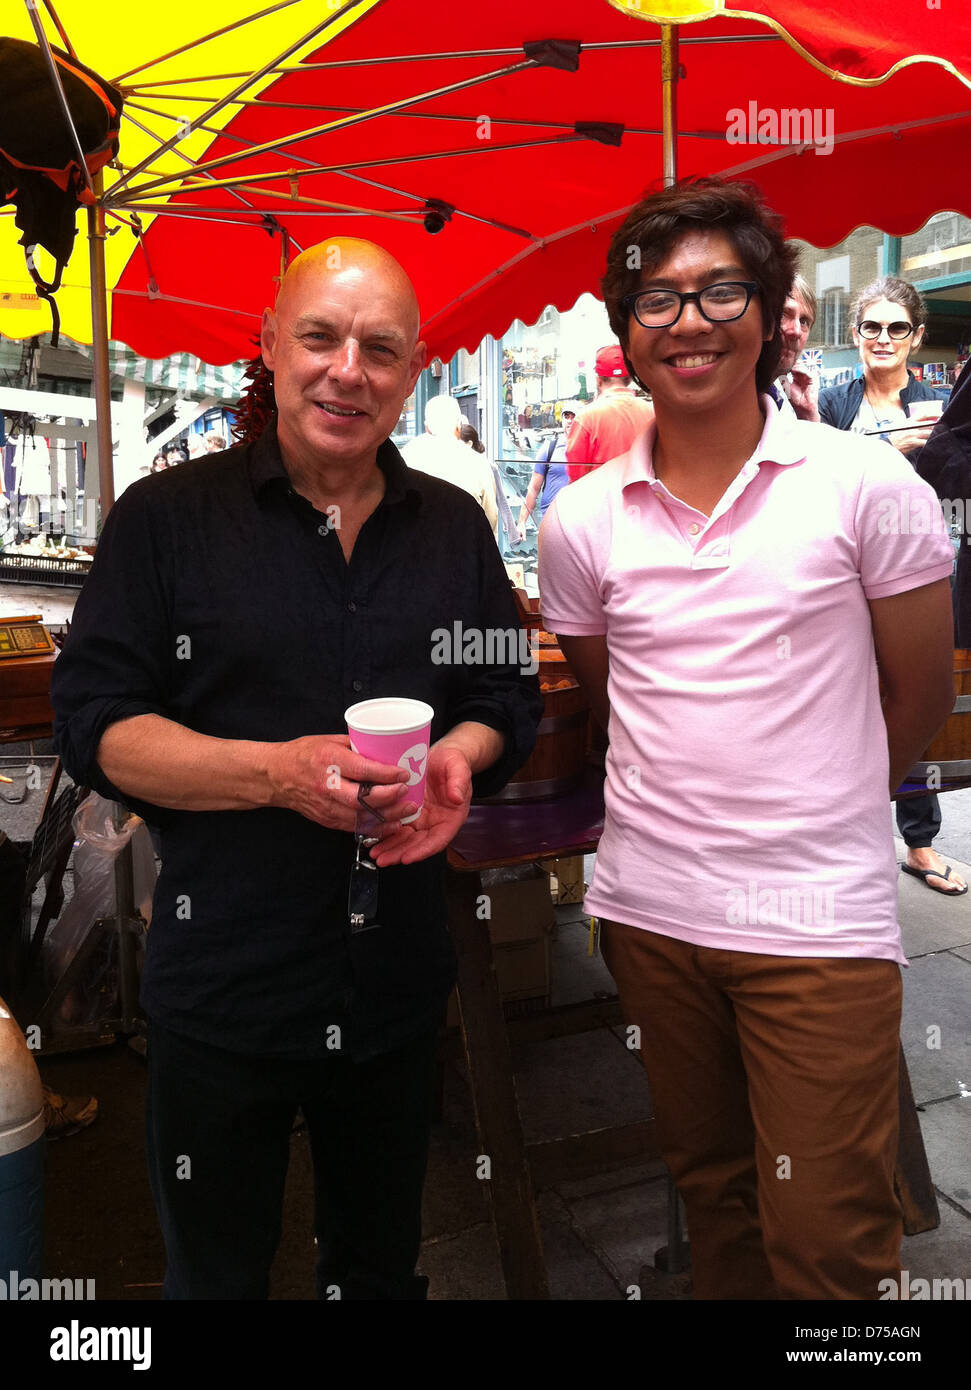 Brian Eno and Nielsen Cerbolles Operation Cup of Tea holds an anti-riot event London, England - 12.08.11 Stock Photo